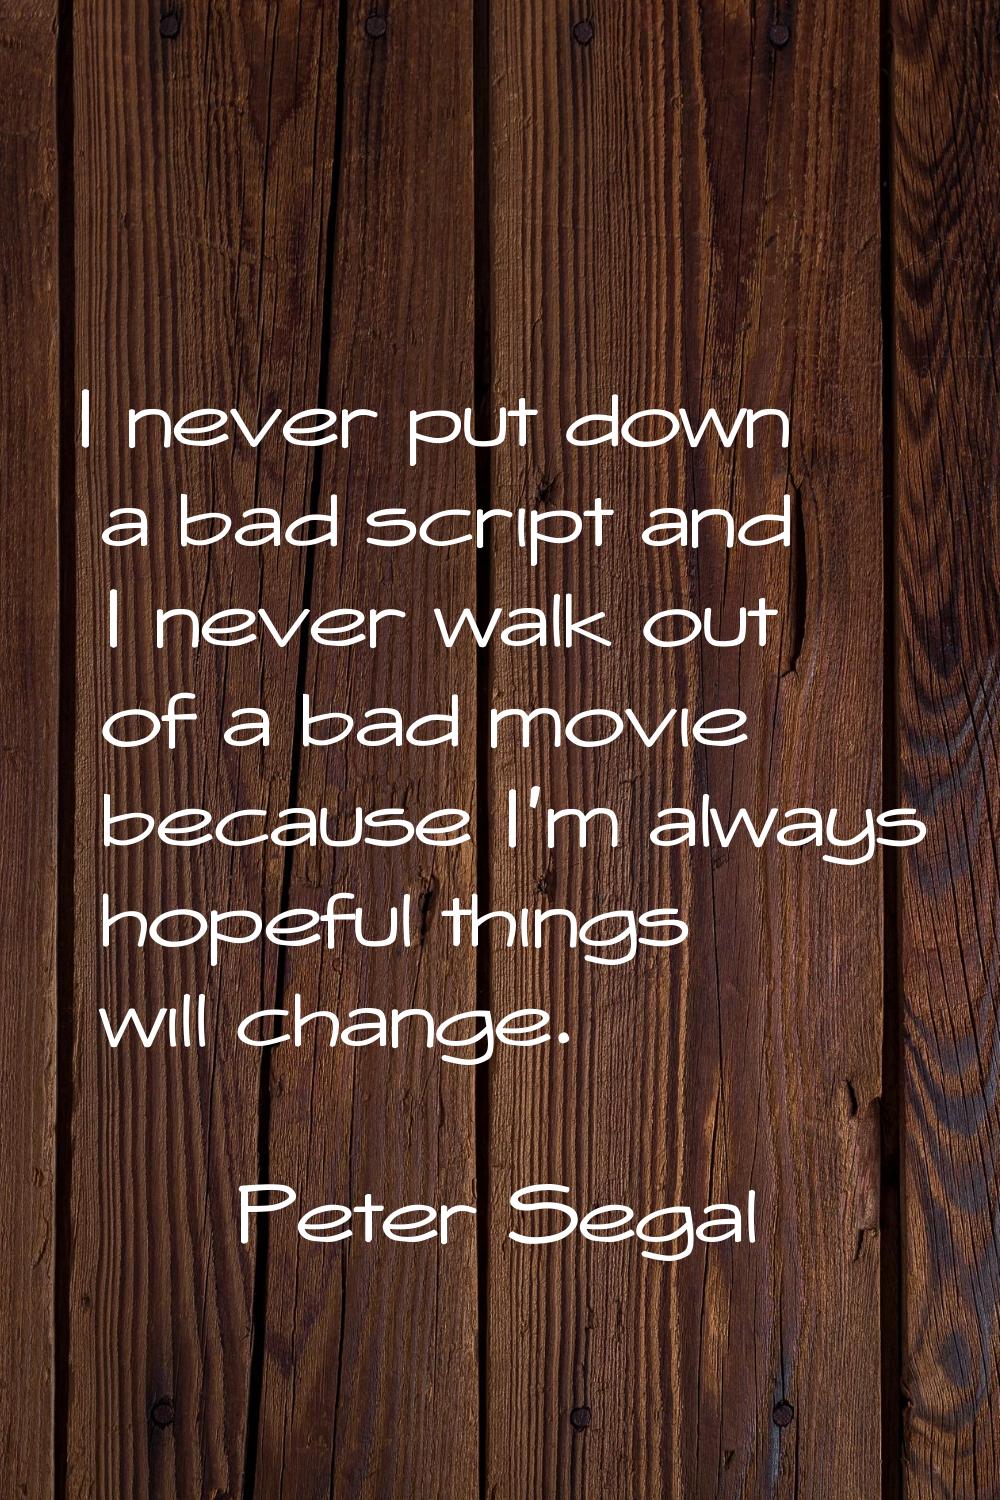 I never put down a bad script and I never walk out of a bad movie because I'm always hopeful things